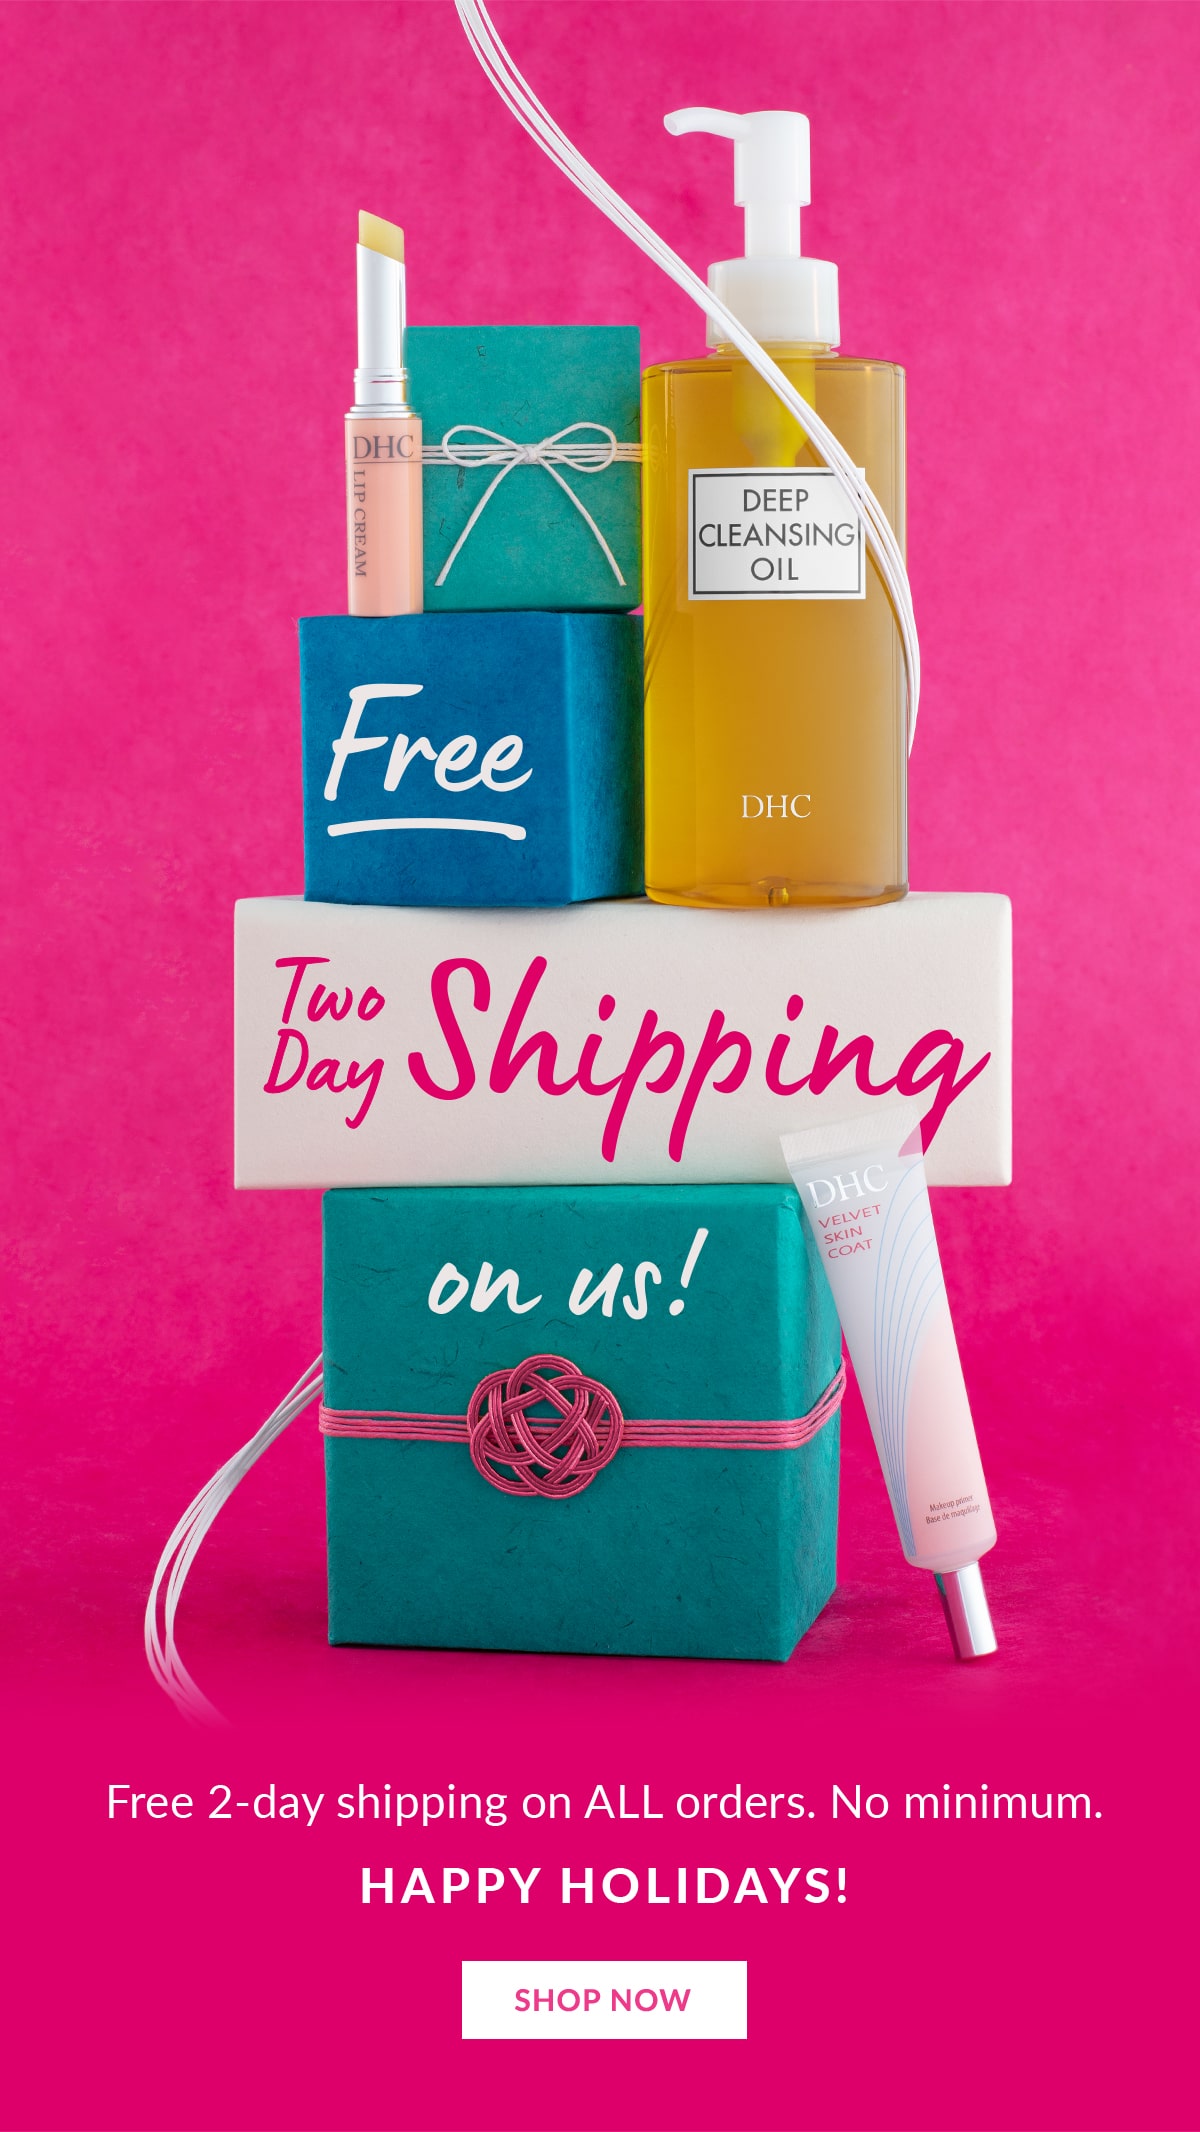 Free 2-Day Shipping on last minute orders!